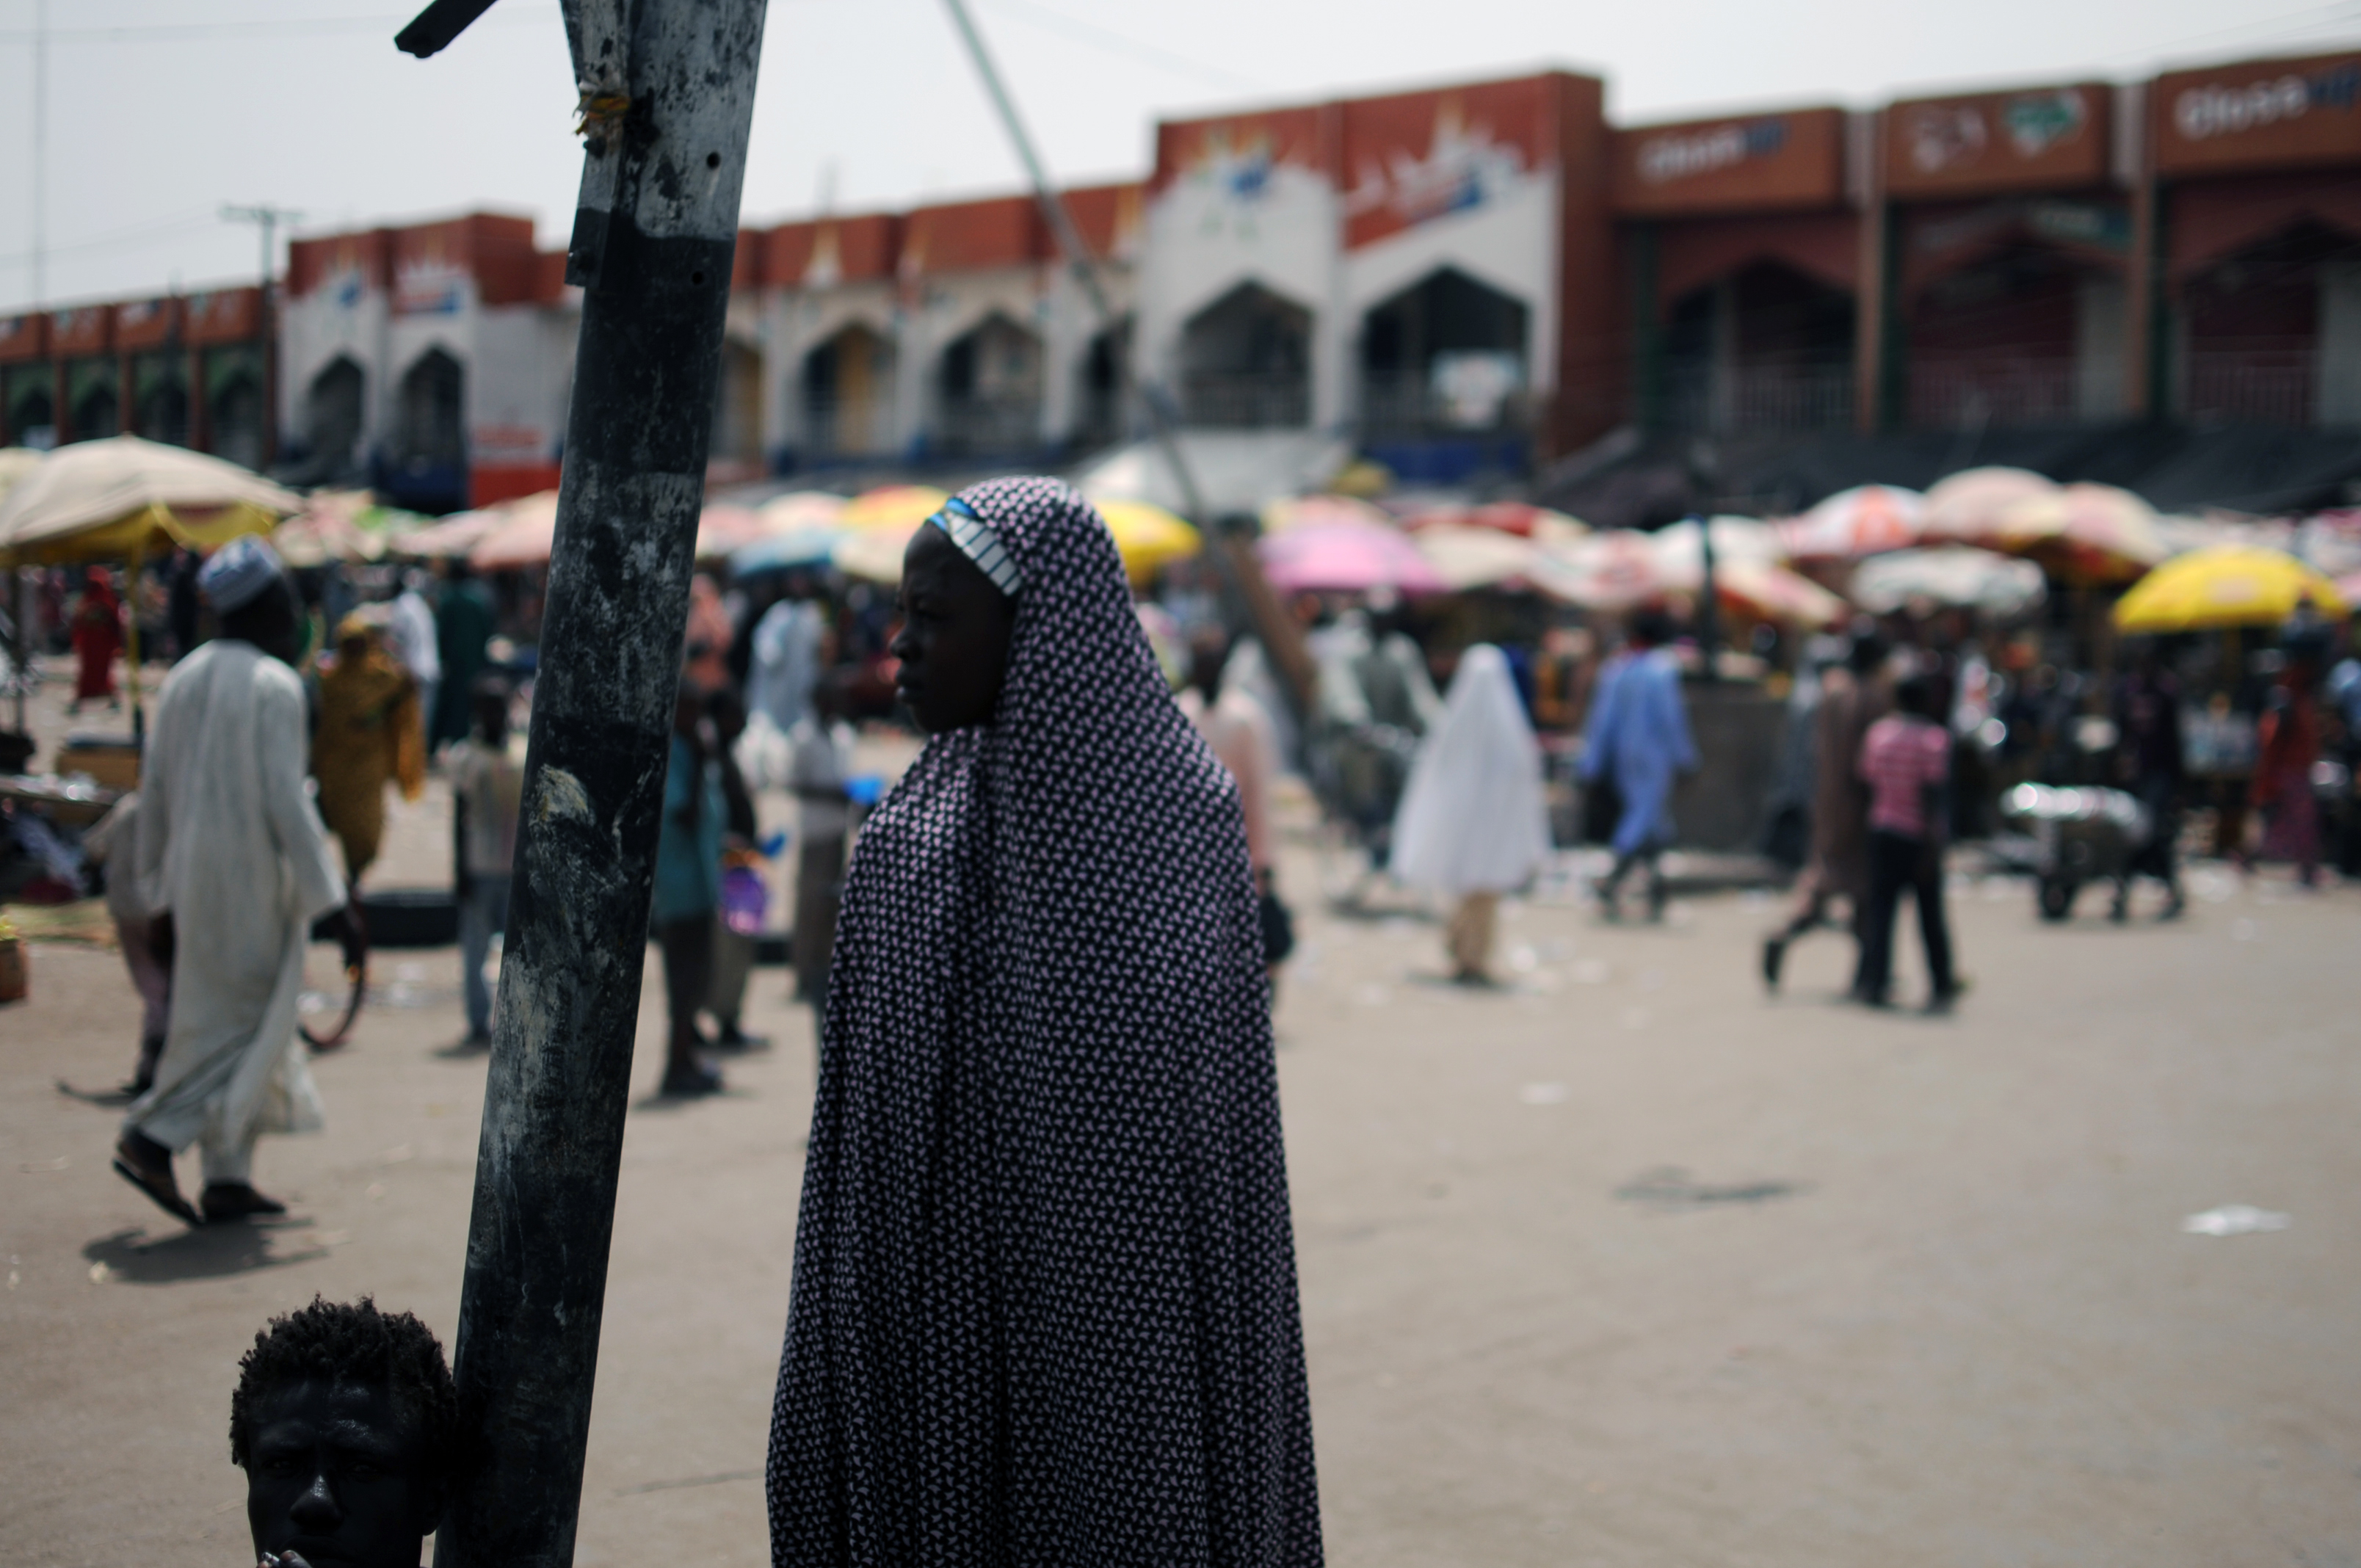 A woman stands at the market  in Maiduguri, the capital of Borno state, Nigeria, on June 6, 2013 (Quentin Leboucher—AFP/Getty Images)